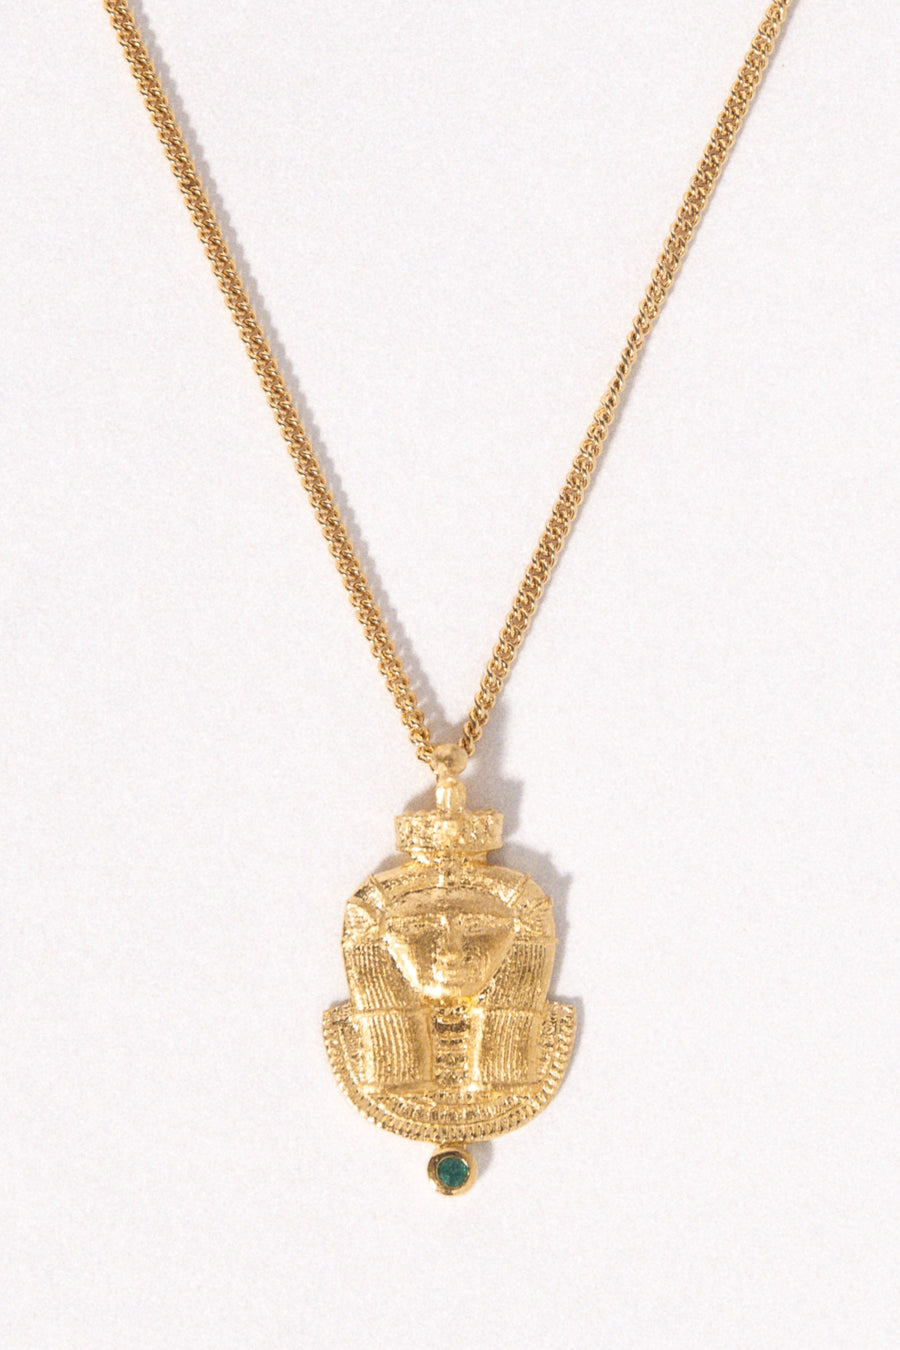 Temple of the Sun Jewelry Gold / 18 inch Dendera Necklace